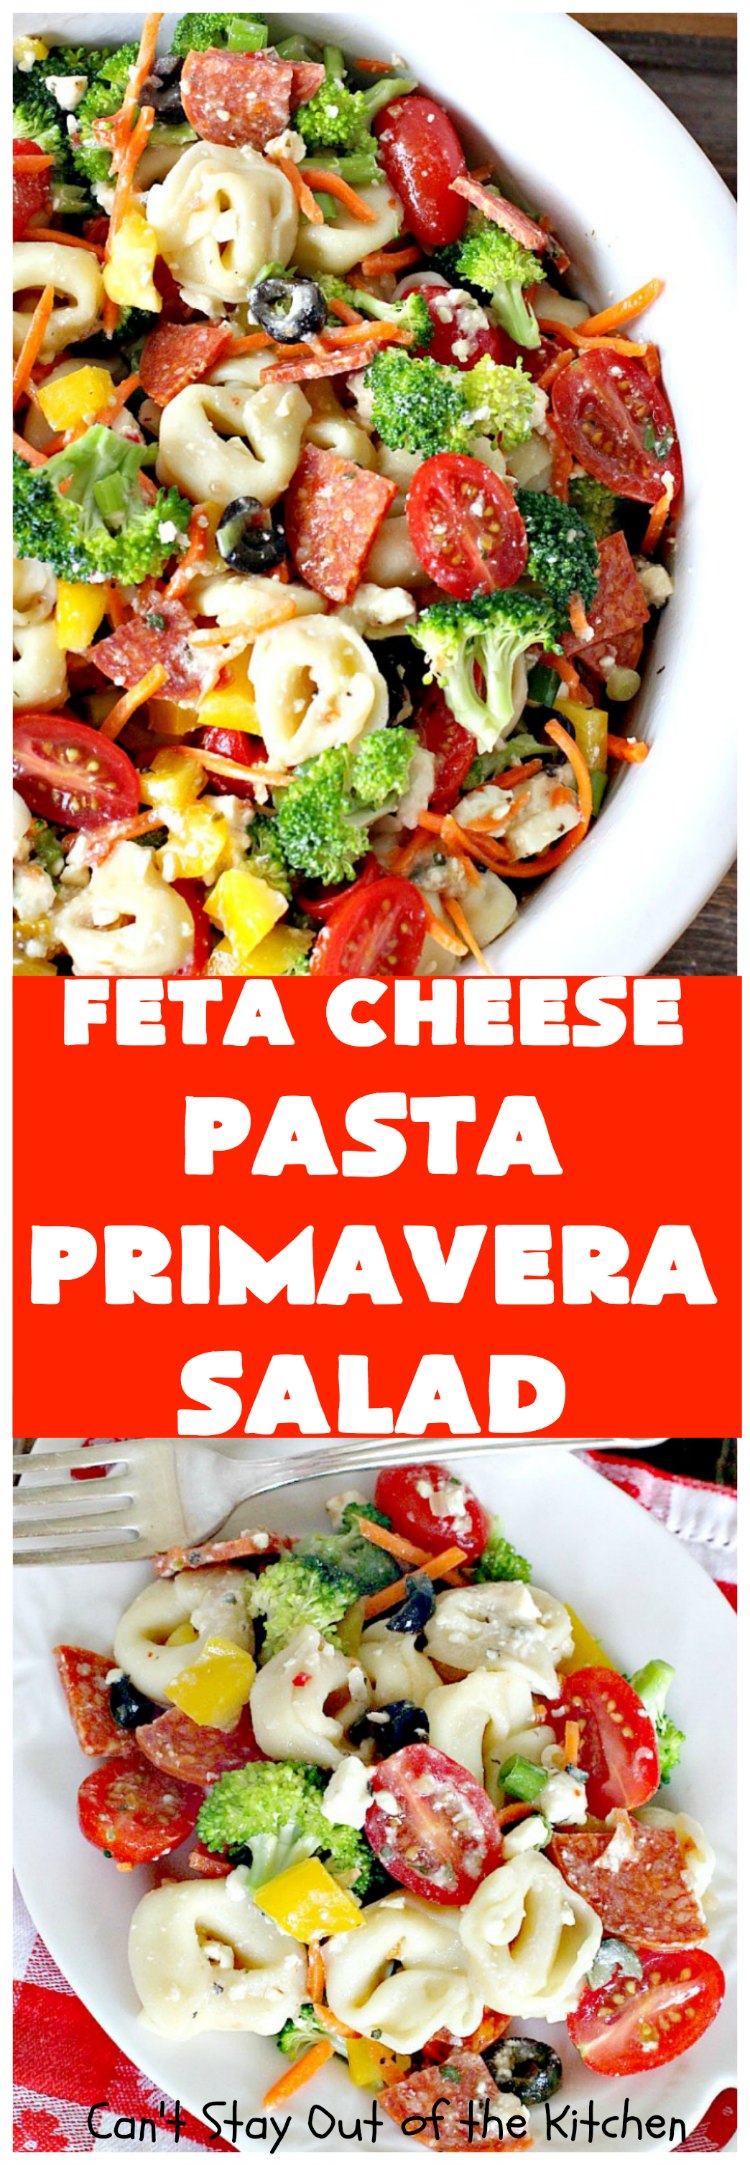 Feta Cheese Pasta Primavera Salad | Can't Stay Out of the Kitchen | this delightful #pasta #salad is great for #tailgating parties, potlucks or any backyard #BBQ. #tortellini #pepperoni #olives #broccoli #tomatoes